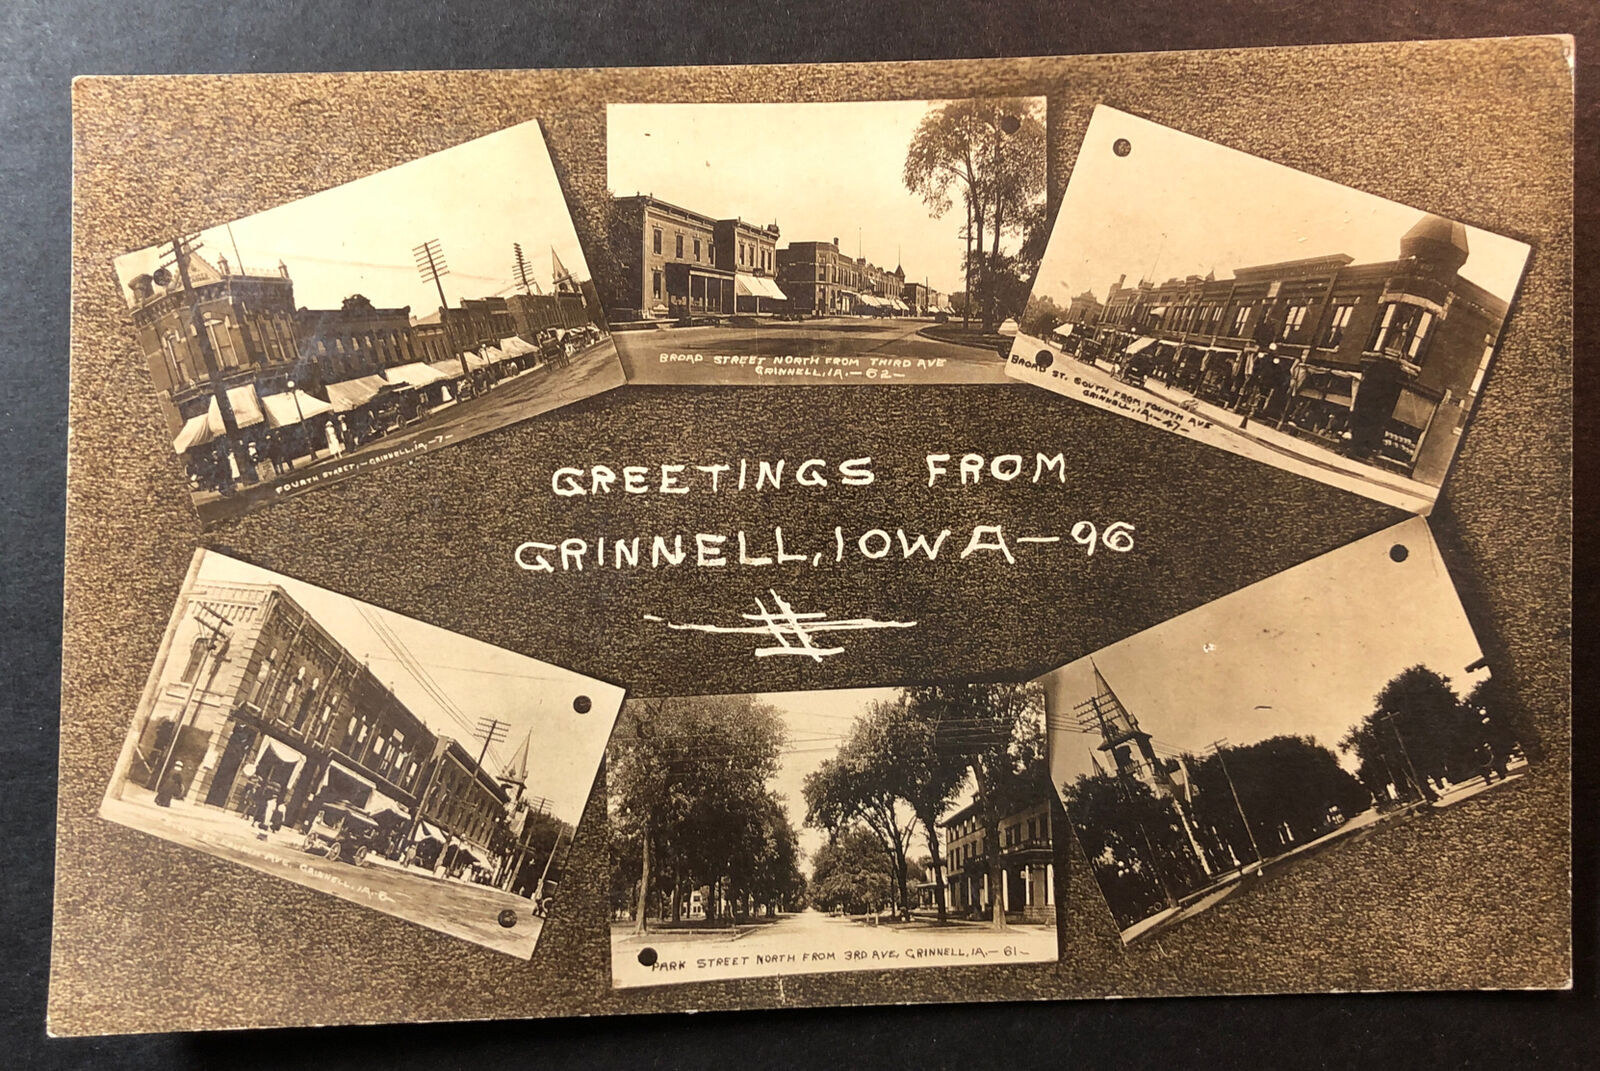 Greetings from Grinnell Iowa RPPC multi-view street scenes Sterling LL Cook